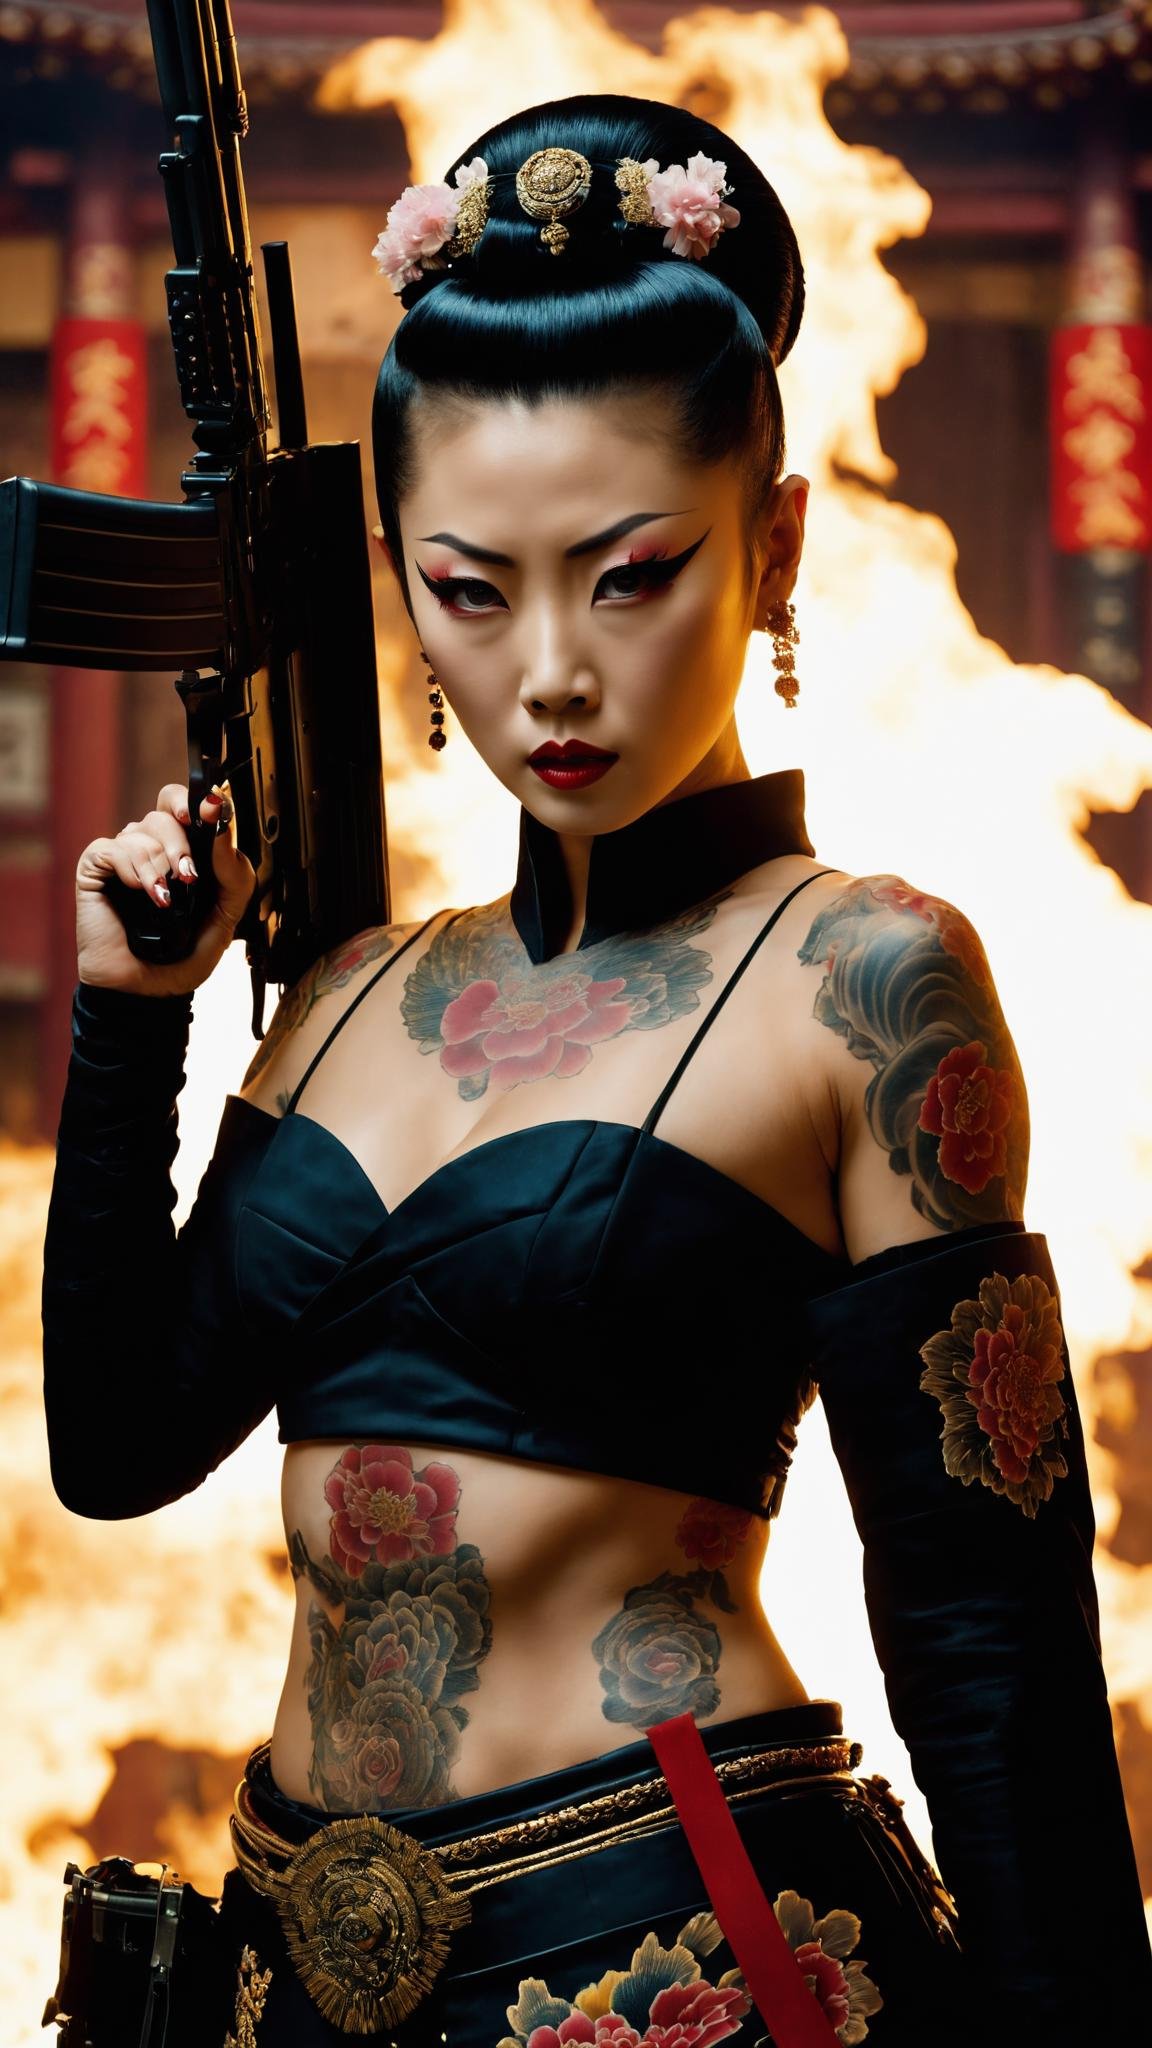 still frame of action movie, superb dreamlike luxury stunning oiran tattooed girl special forces using a rifle in a fight scene , cinematic movie by Sam Raimi , Wally Pfister